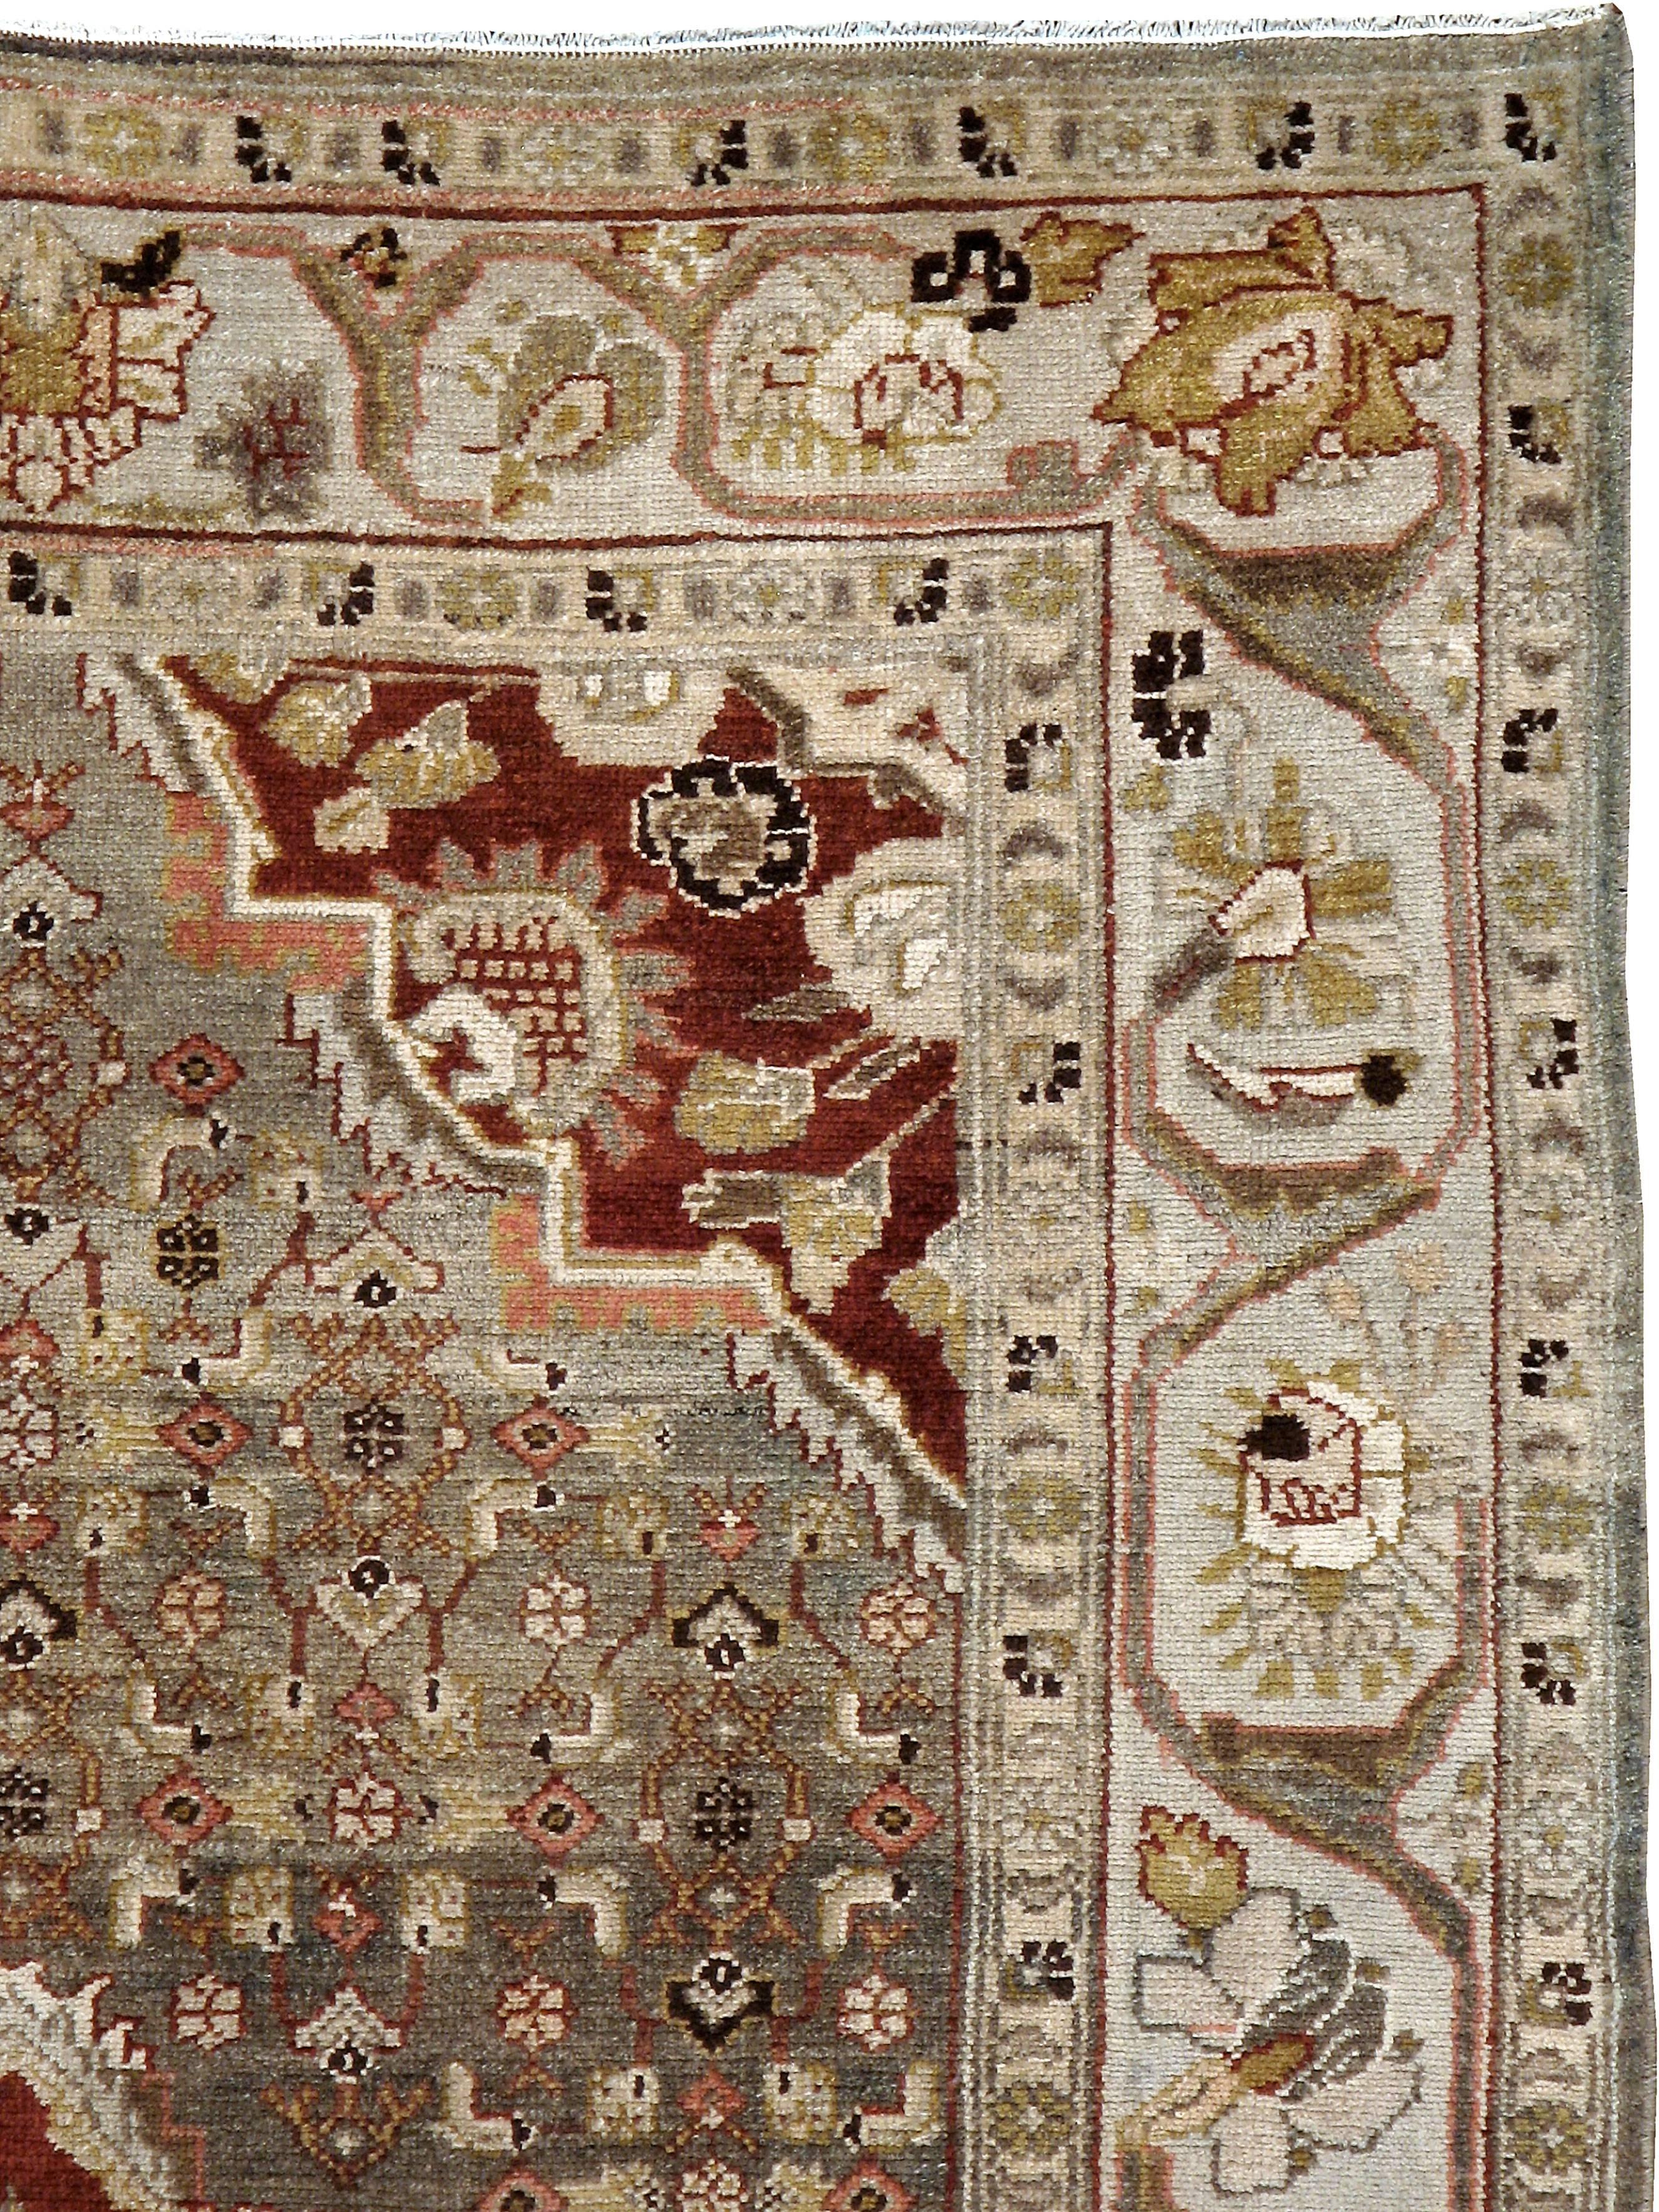 An antique Persian Malayer carpet from the second quarter of the 20th century.